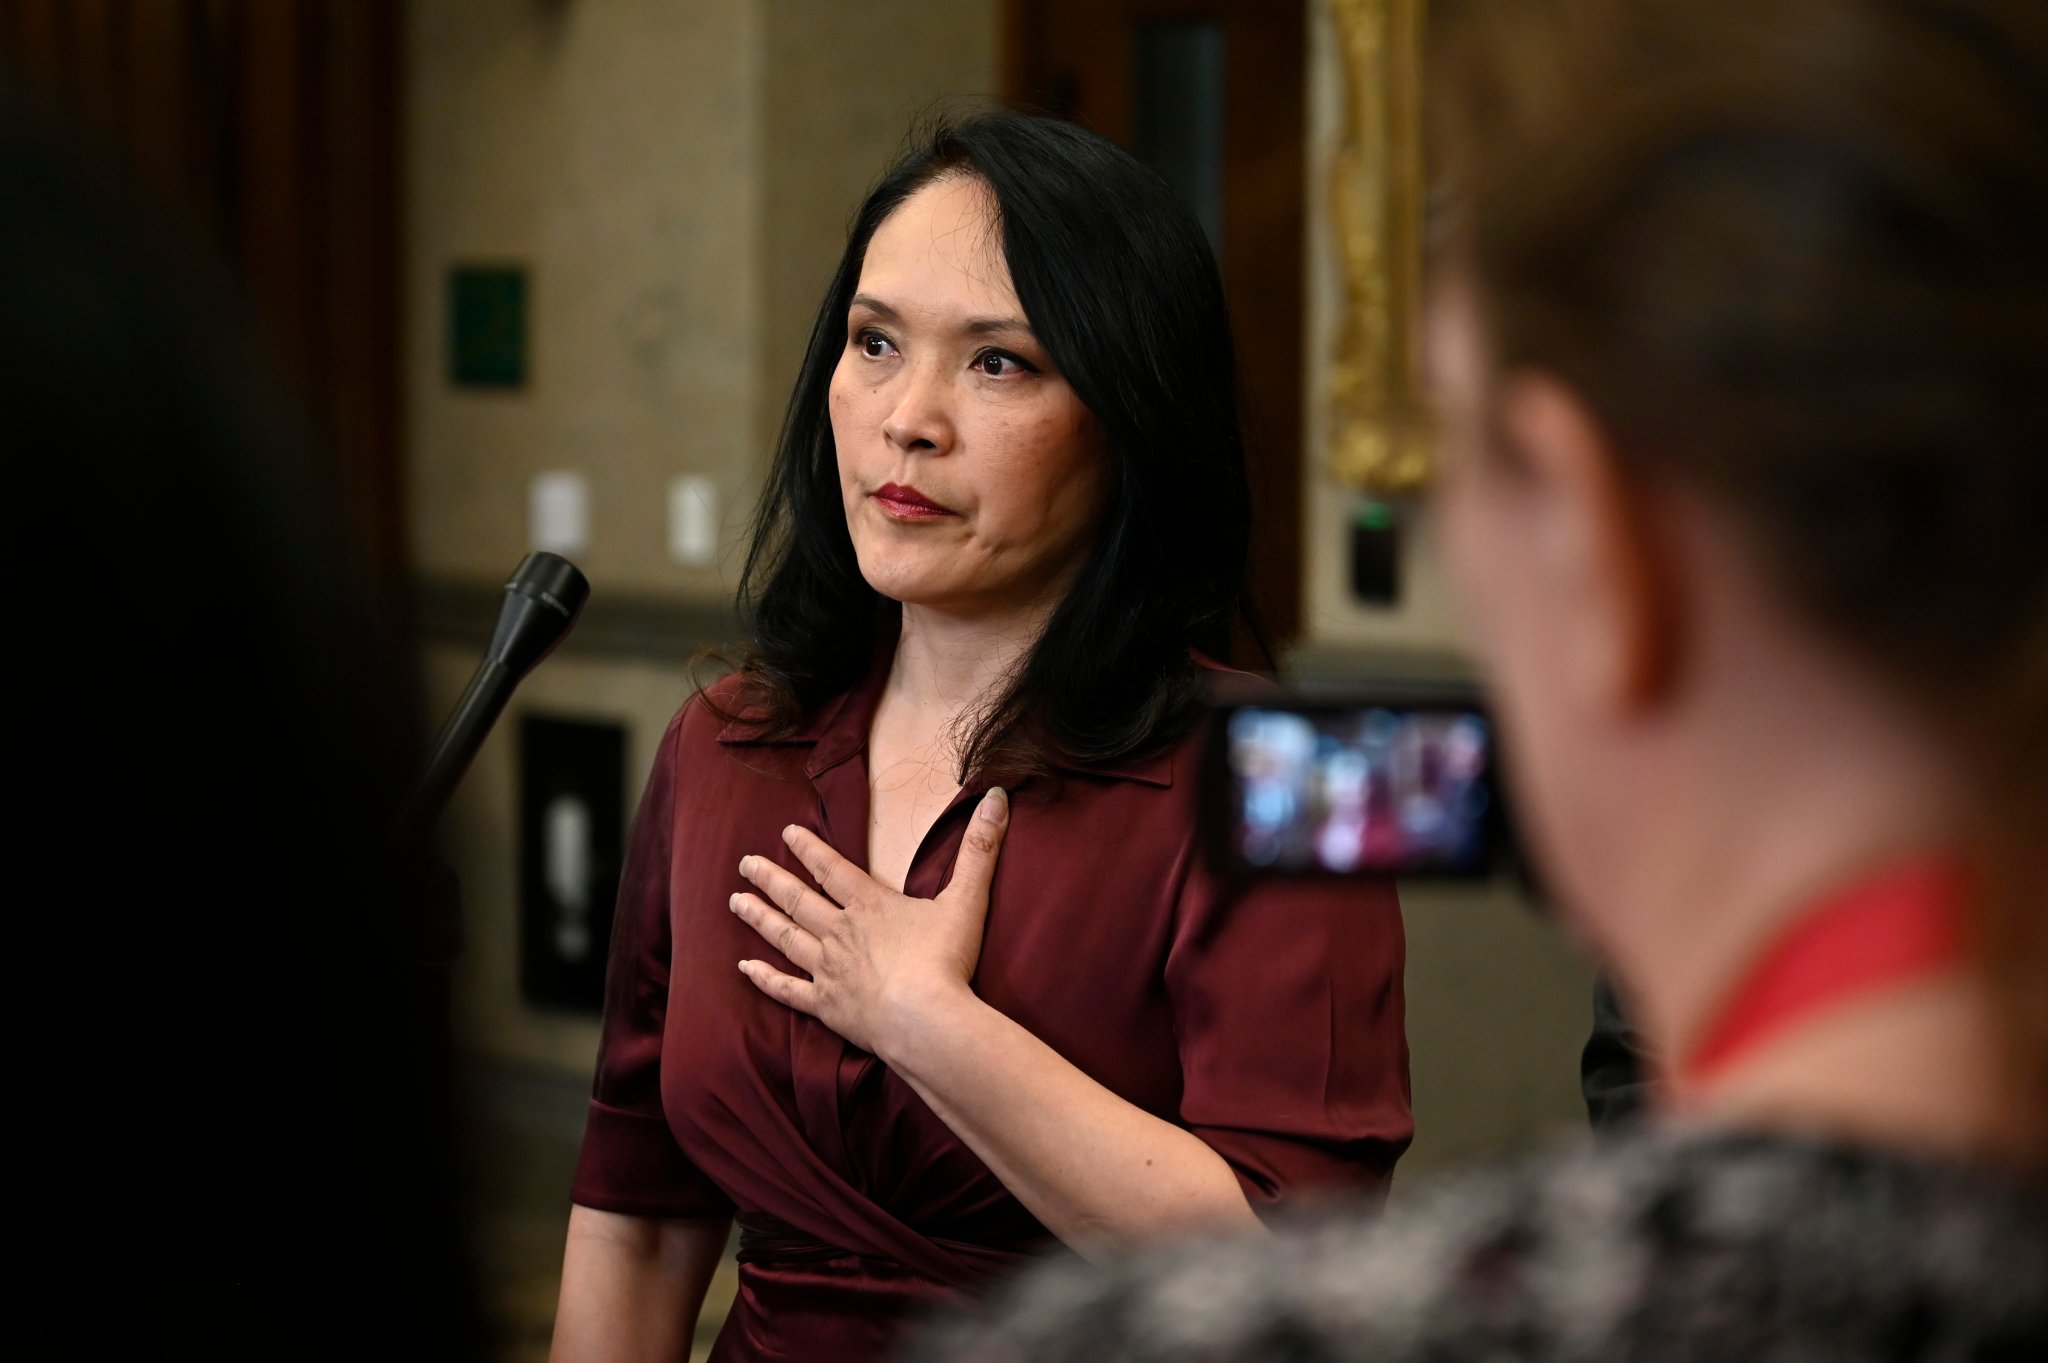 NDP MP Jenny Kwan speaks to reporters about her briefing with CSIS, which confirmed she was a target of foreign interference. THE CANADIAN PRESS/Justin Tang